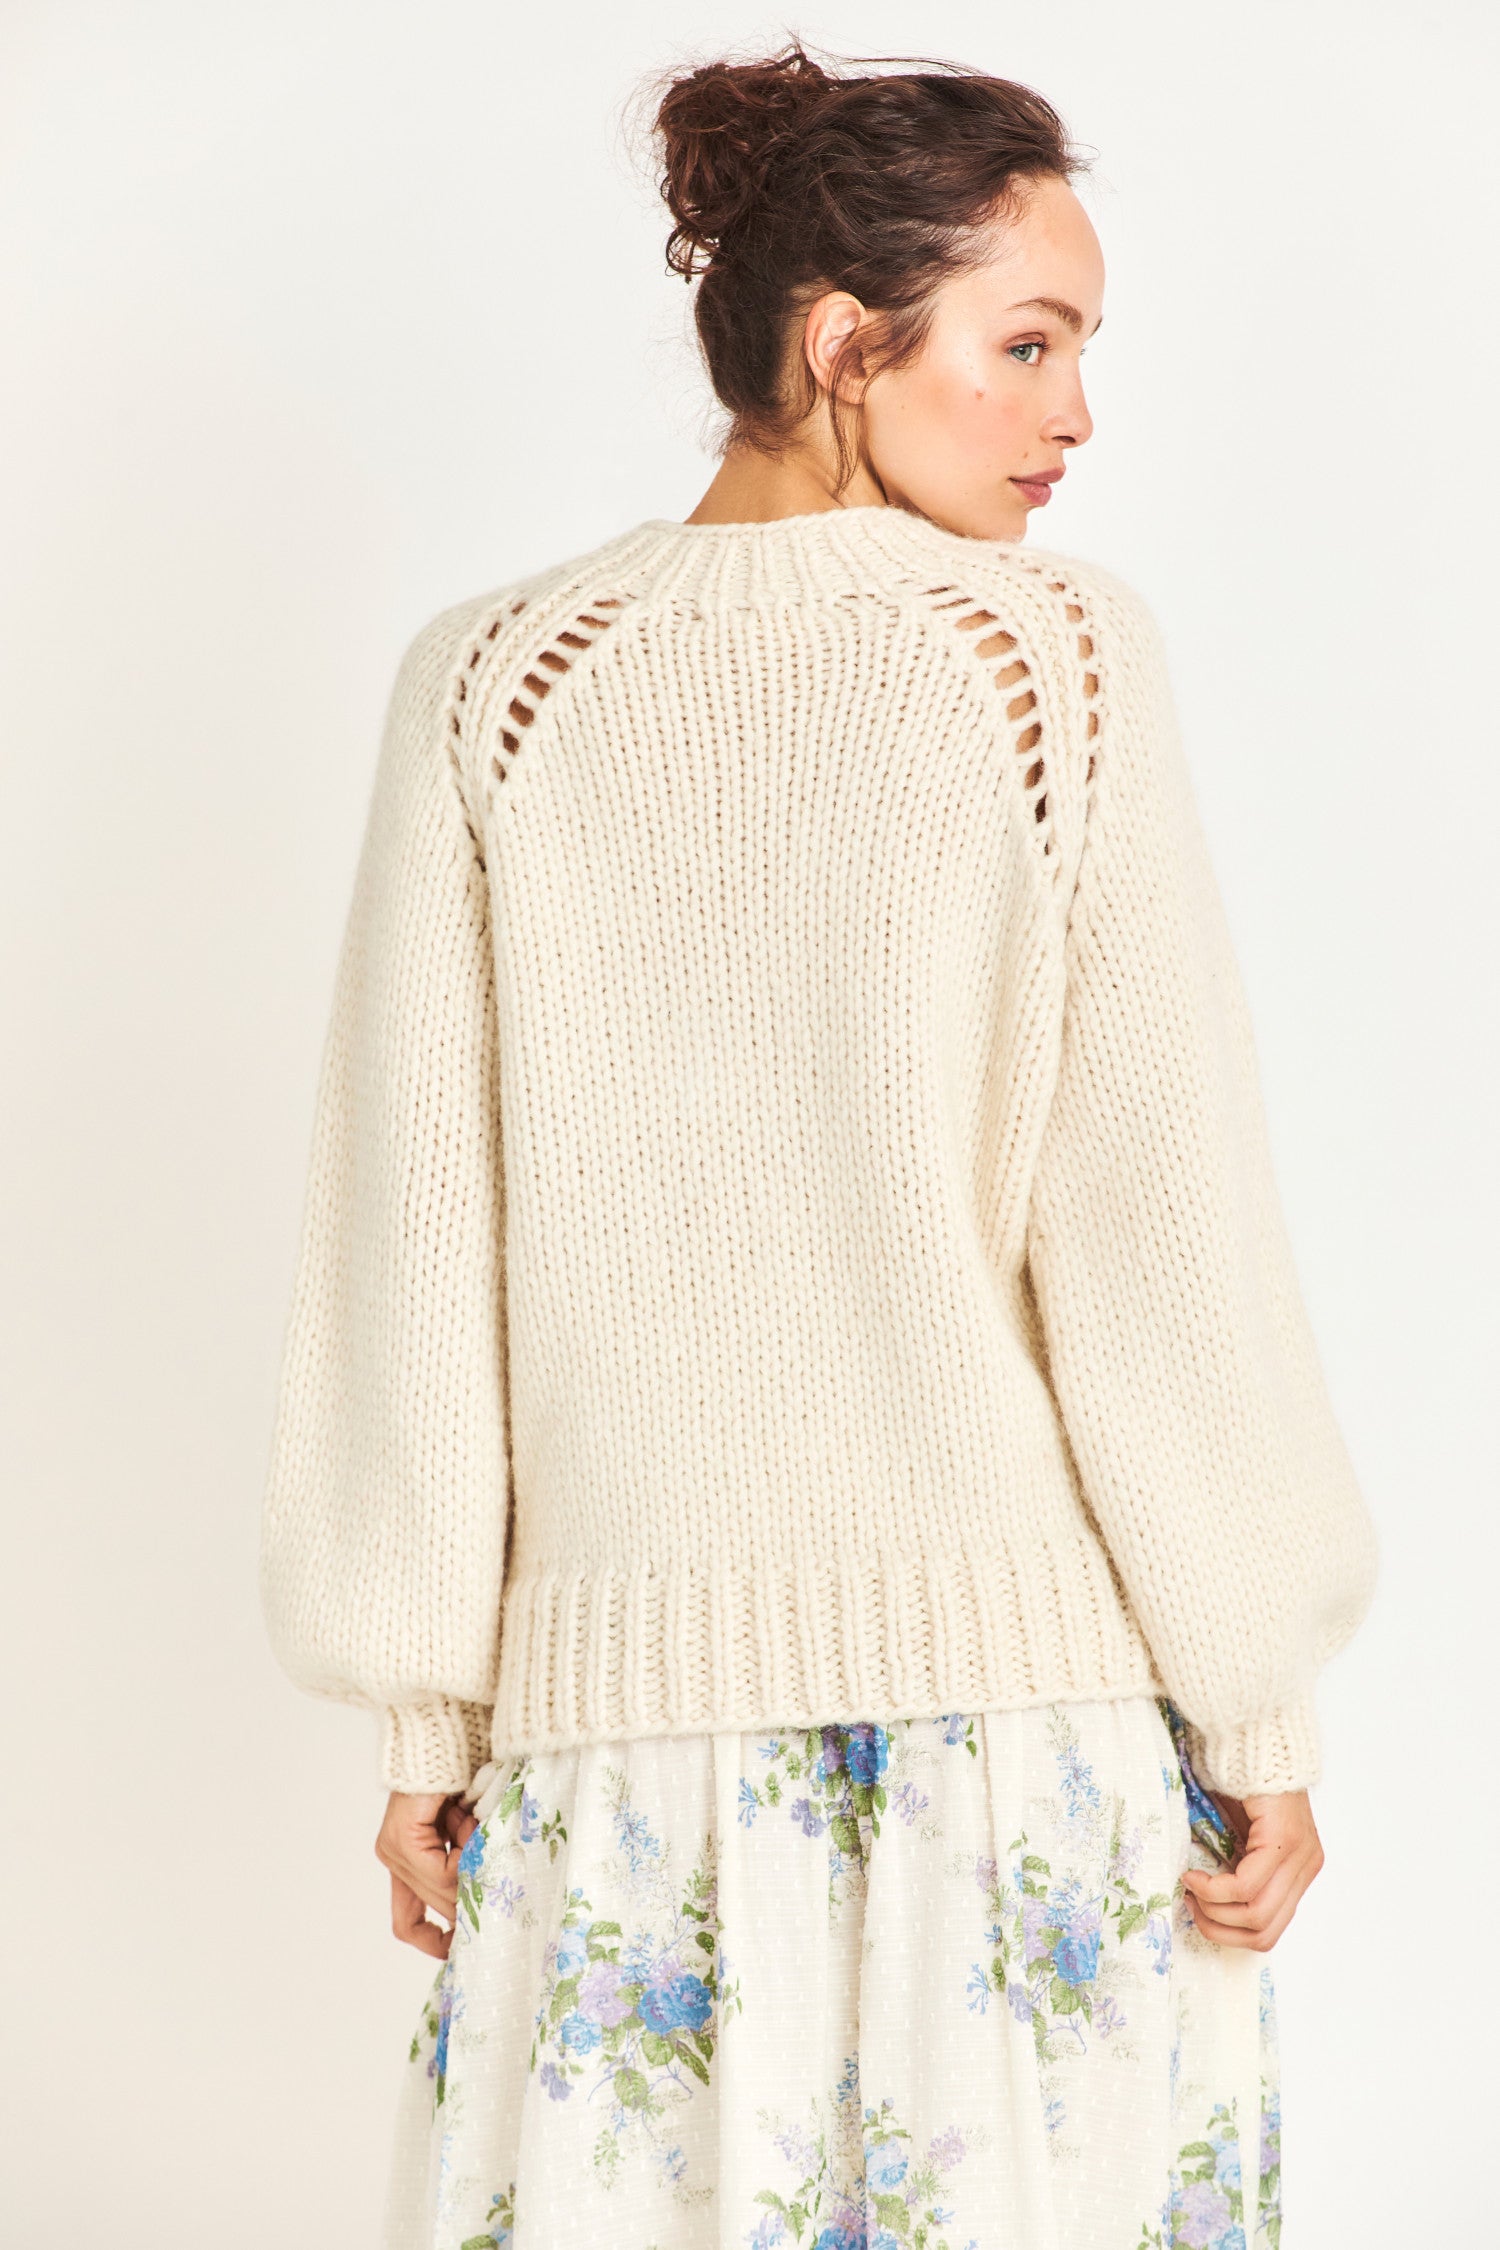 Back image of model wearing white knit pullover sweater